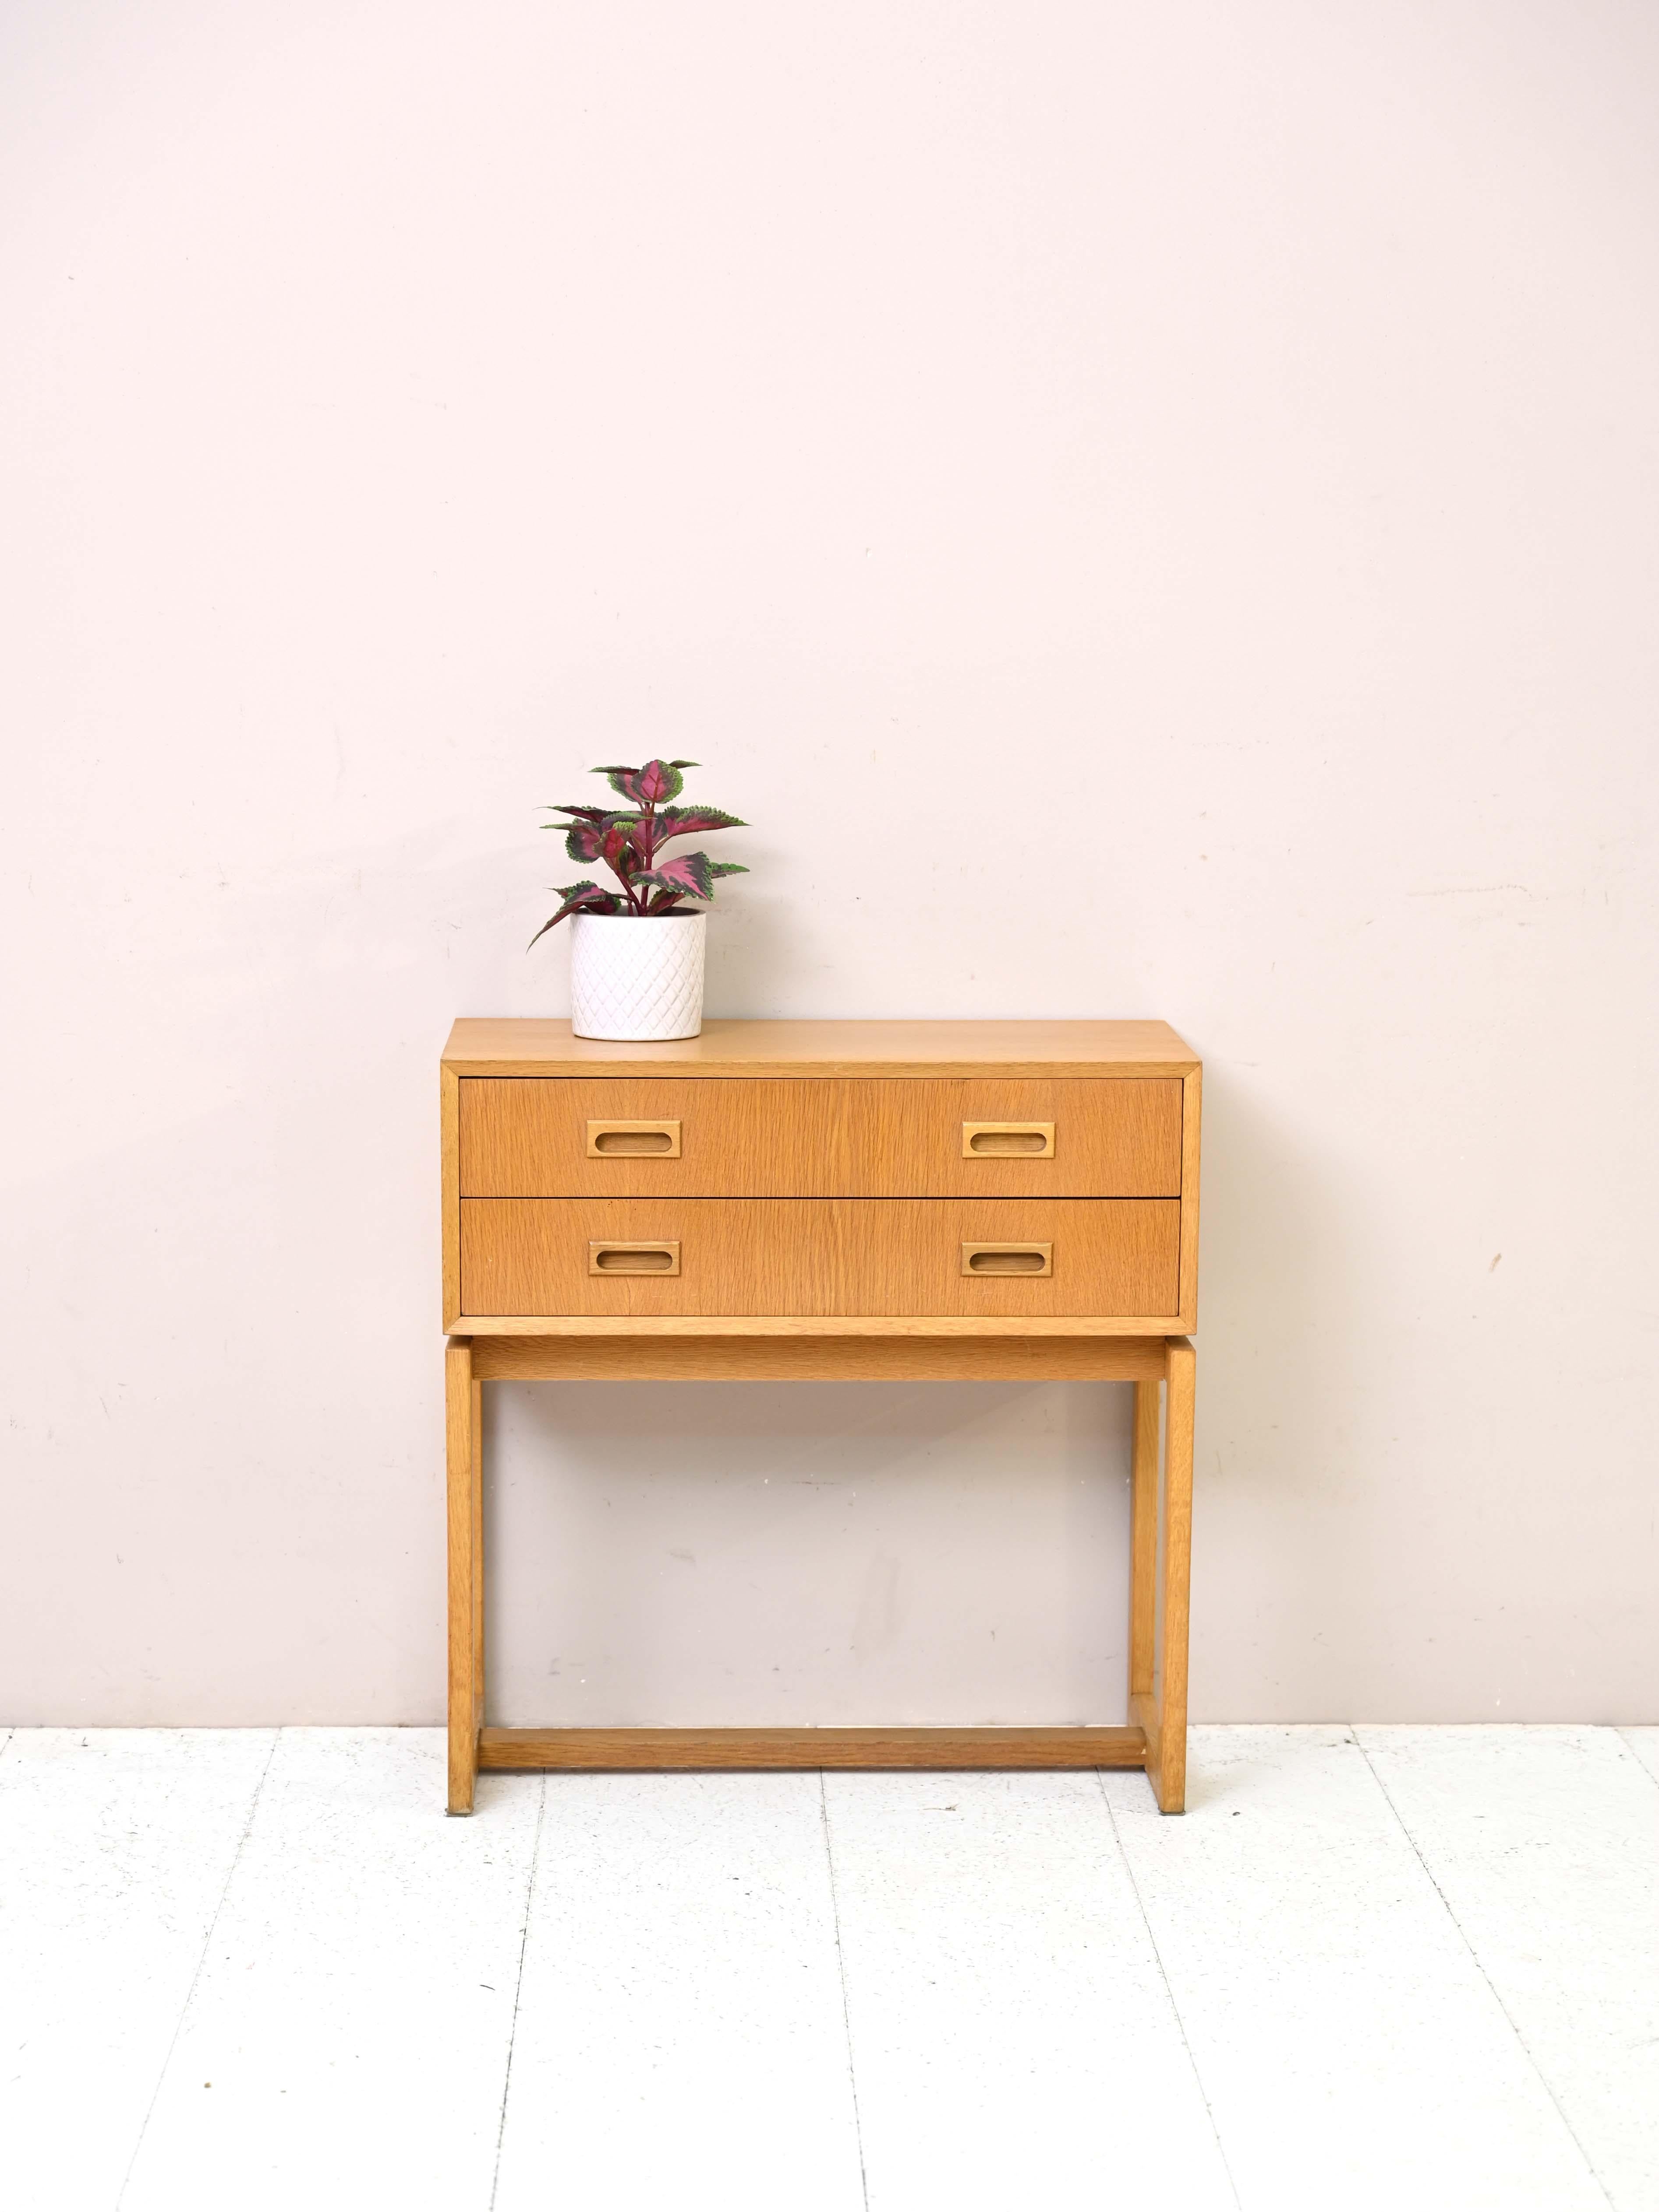 Original 1960s vintage cabinet.

This small oak chest of drawers, thanks to its small size, can be used at the entrance or in the bathroom but also as a nightstand. 
Characterized by minimal, square lines, it traces the modern style typical of